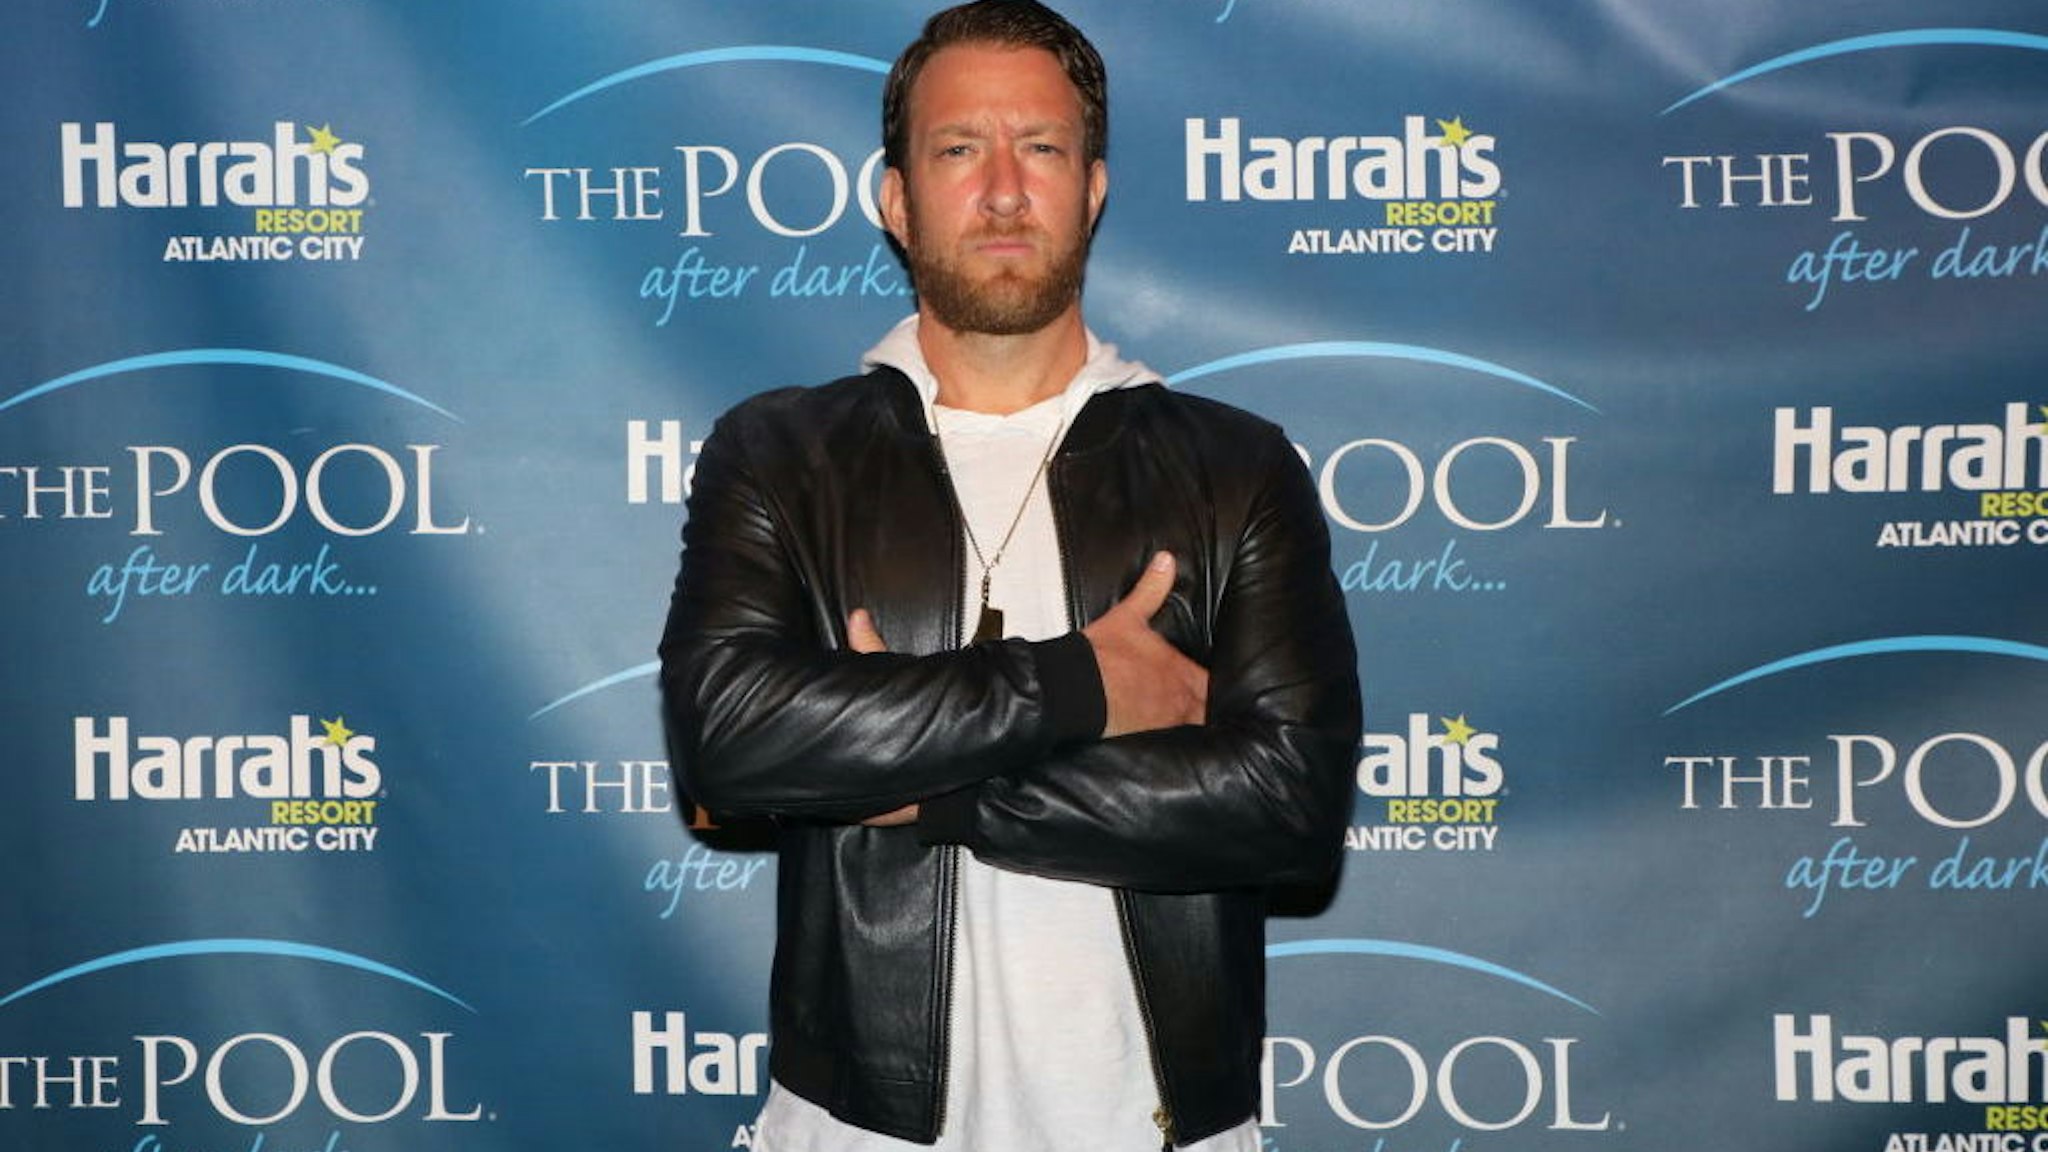 ATLANTIC CITY, NJ – MAY 11: David Portnoy of Barstool Sports hosts The Pool After Dark at Harrah's Resort on Saturday May 11, 2019 in Atlantic City, New Jersey. (Photo by Tom Briglia/ Getty Images)